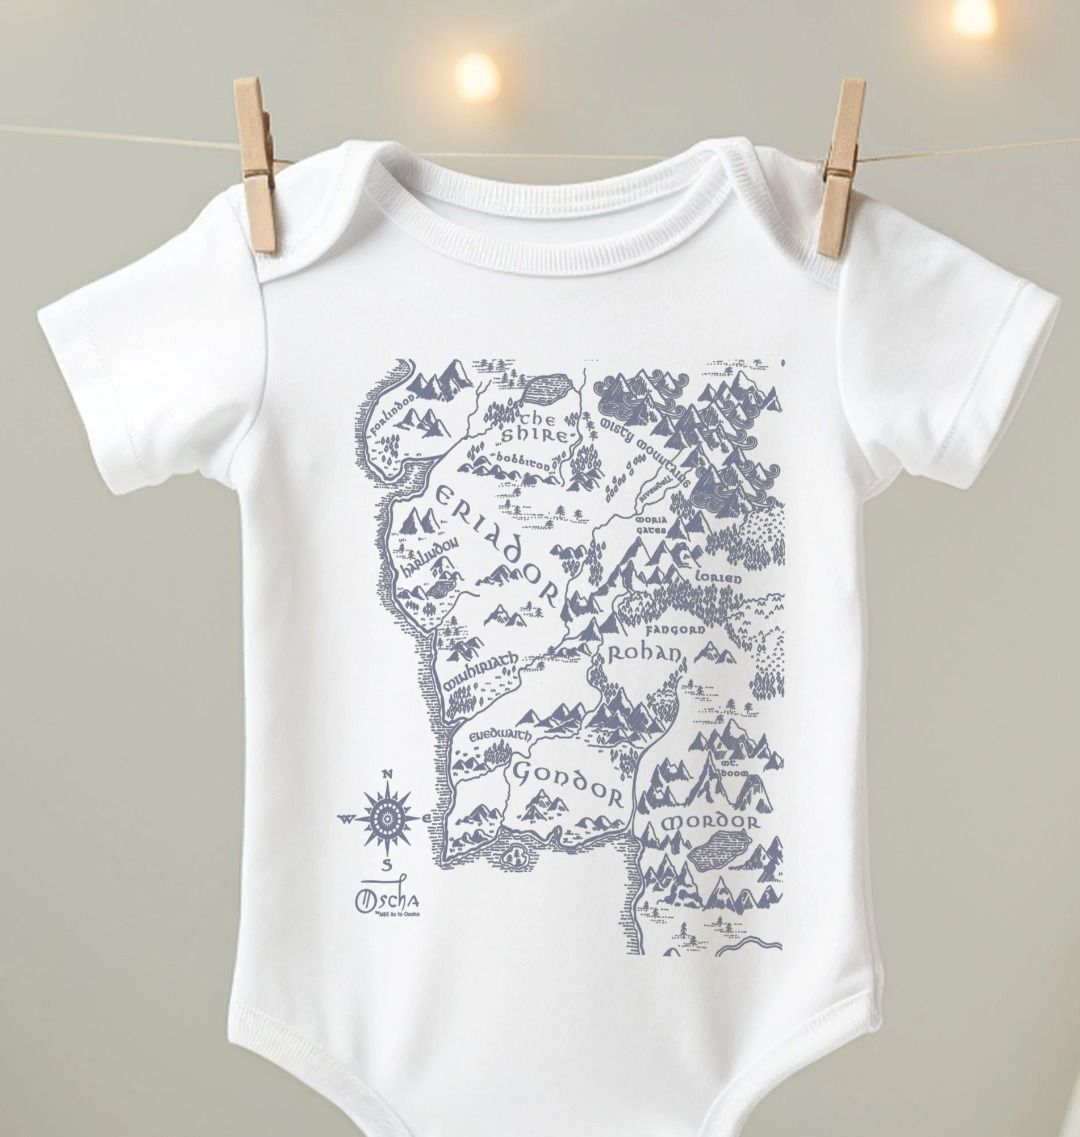 Realm of MIDDLE-EARTH™ Baby Grow